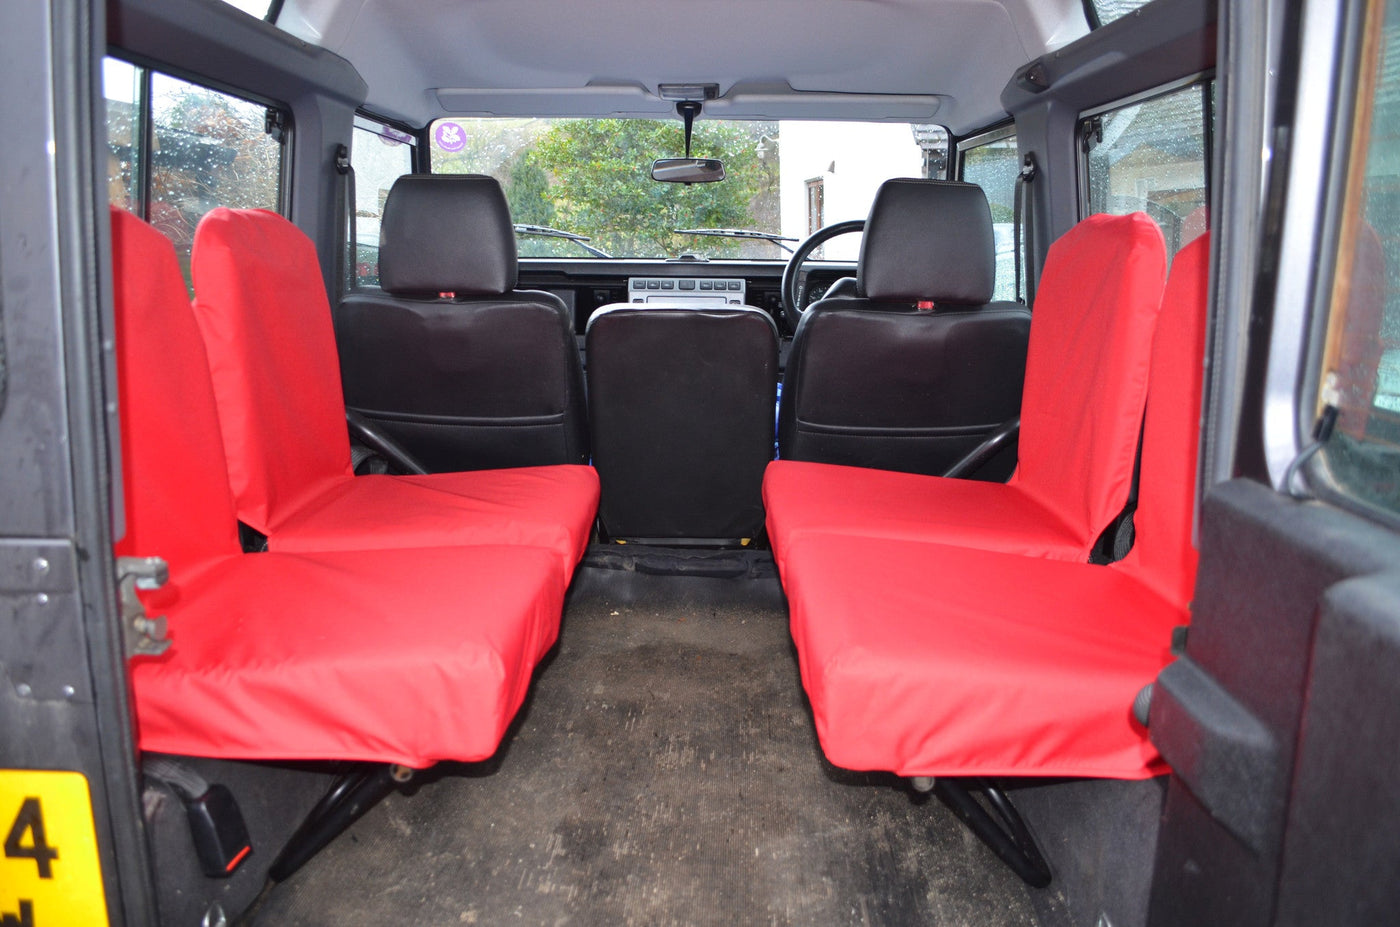 Land Rover Defender 1983 - 2007 Rear Seat Covers Set of 4 Dicky Seats / Red Scutes Ltd